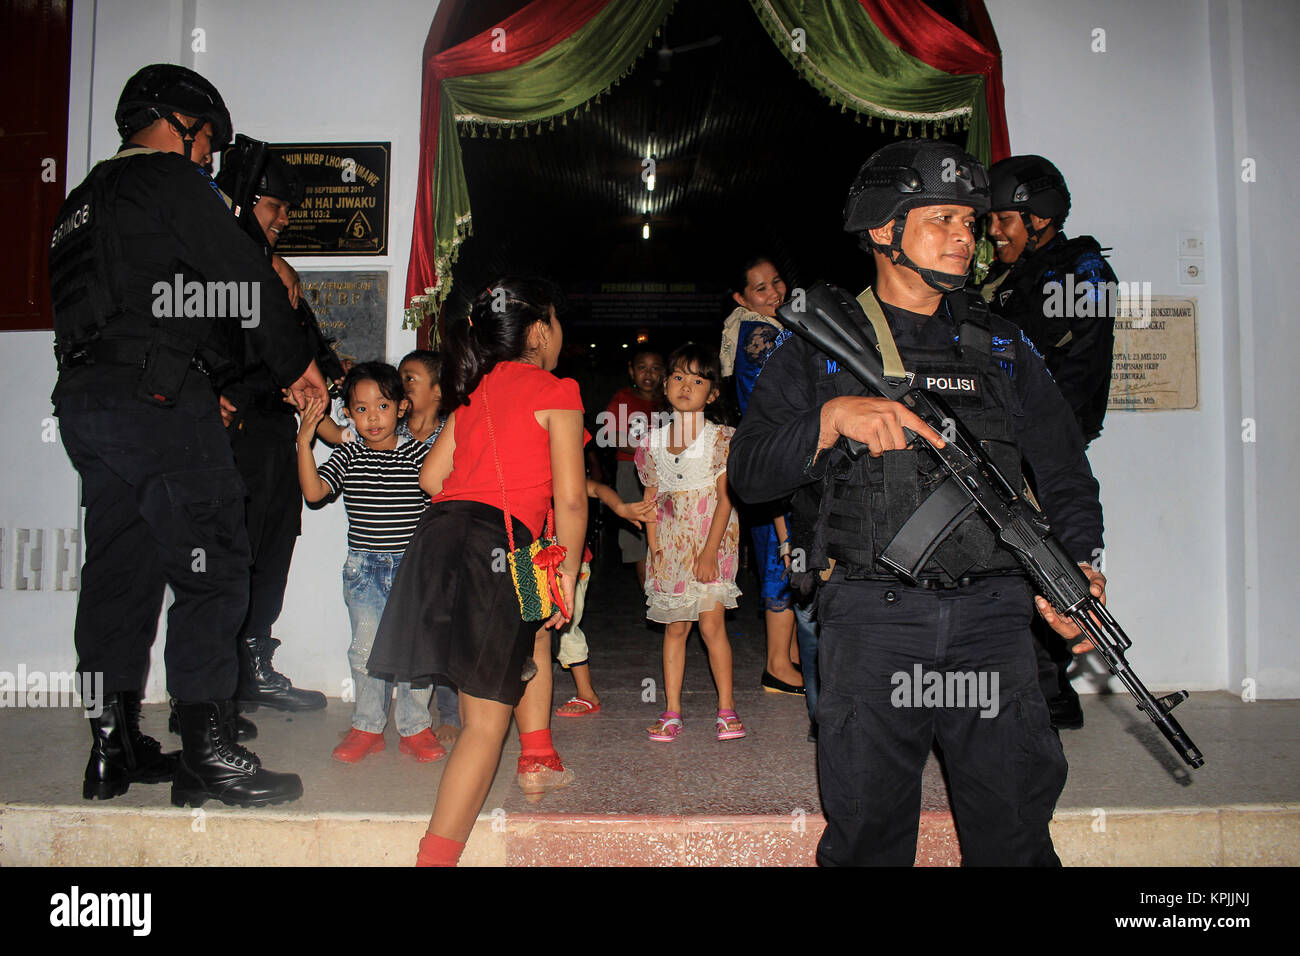 Lhokseumawe, Aceh, Indonesia. 16th Dec, 2017. Several children walk through the policemen agents while heading to the praying room inside the church. Indonesian police conduct routine patrols to prevent anti-terror threats at Lhokseumawe City Church in Aceh. The Indonesian National Police has announced the security and comfort readiness for Christians during the process of celebrating Christmas and welcoming the 2018 new year in Indonesia. Credit: SOPA/ZUMA Wire/Alamy Live News Stock Photo